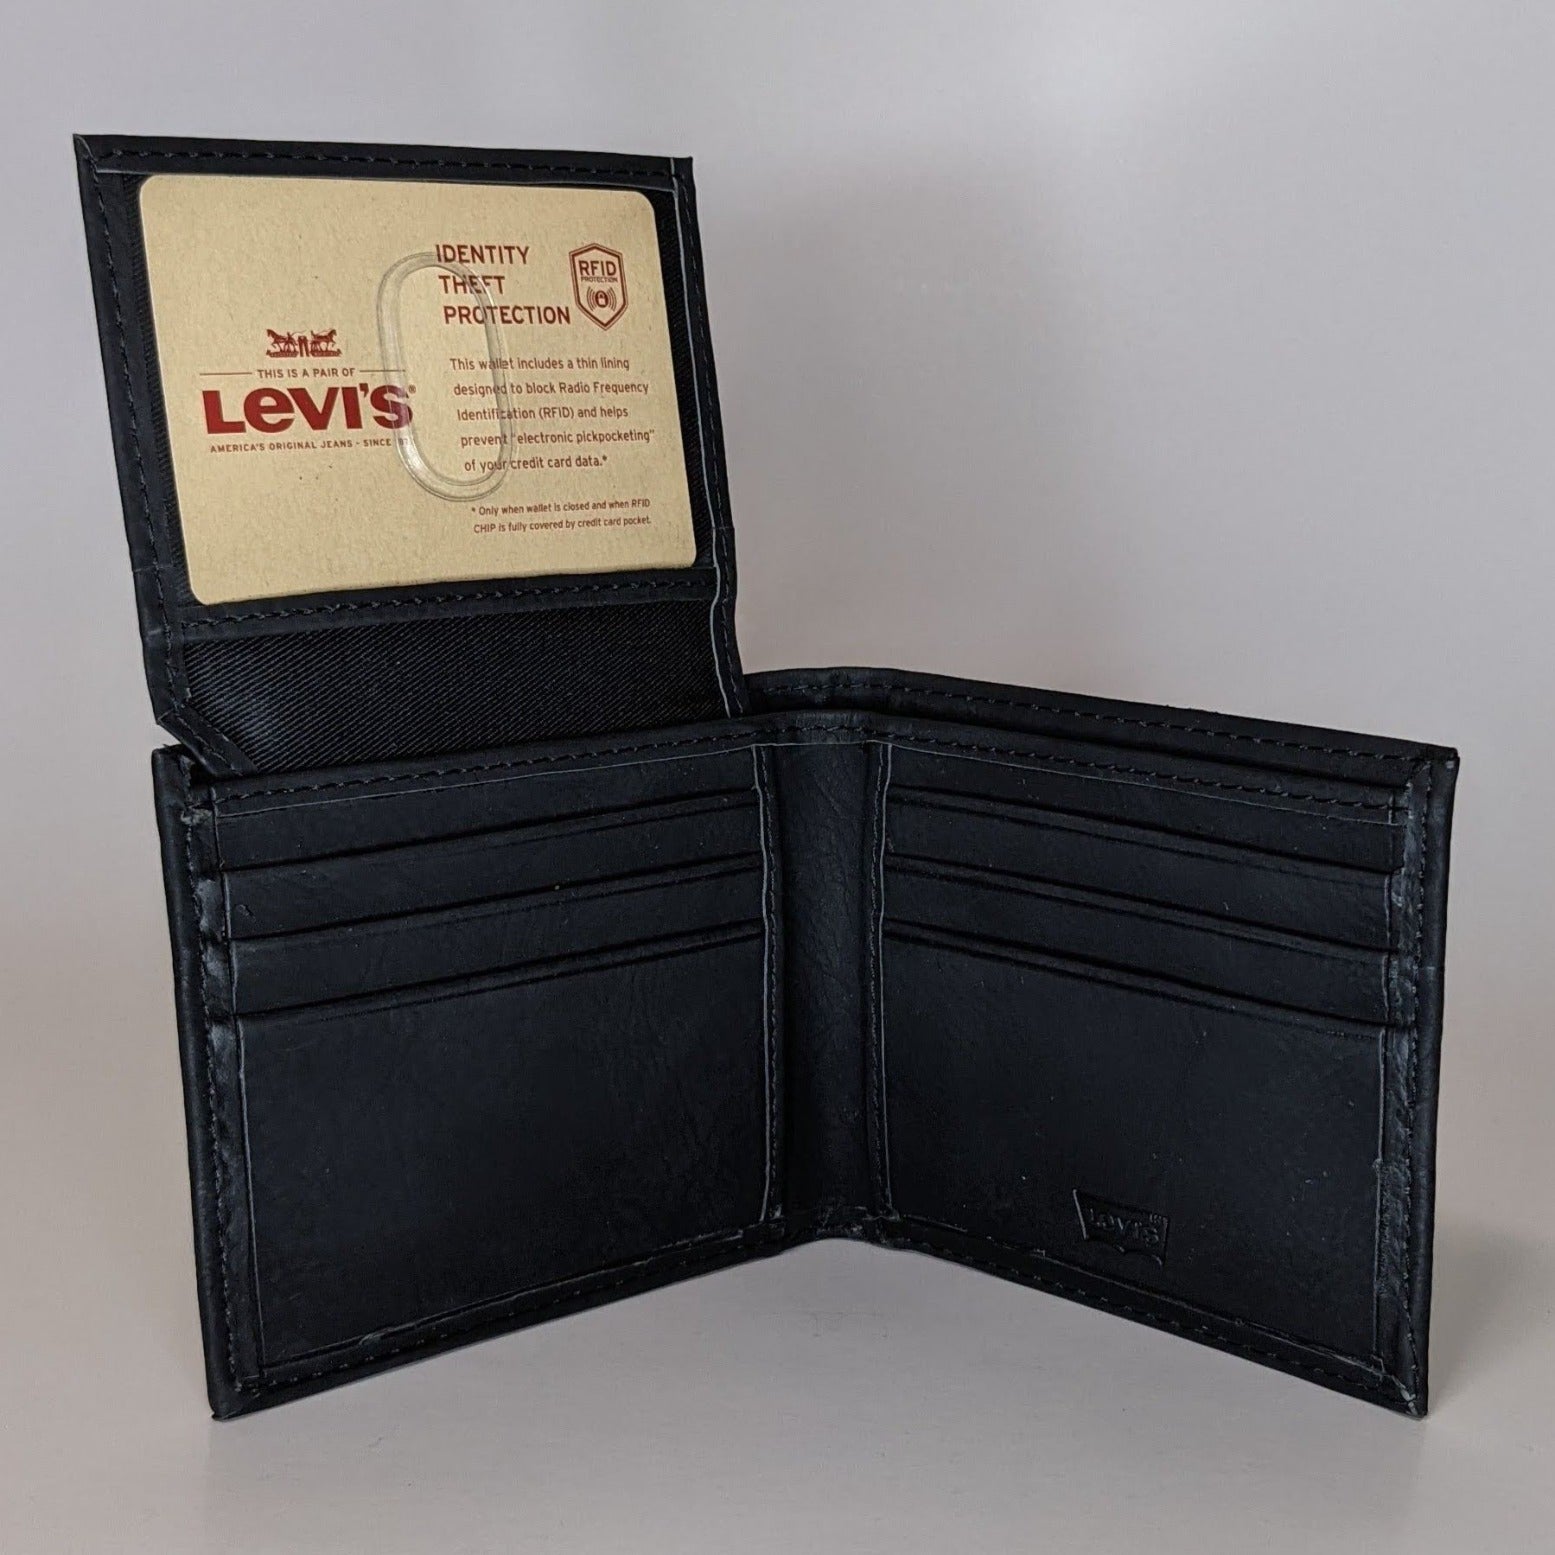 Levi's Men's Trifold Wallet-Sleek and Slim Includes Id Window and Cred